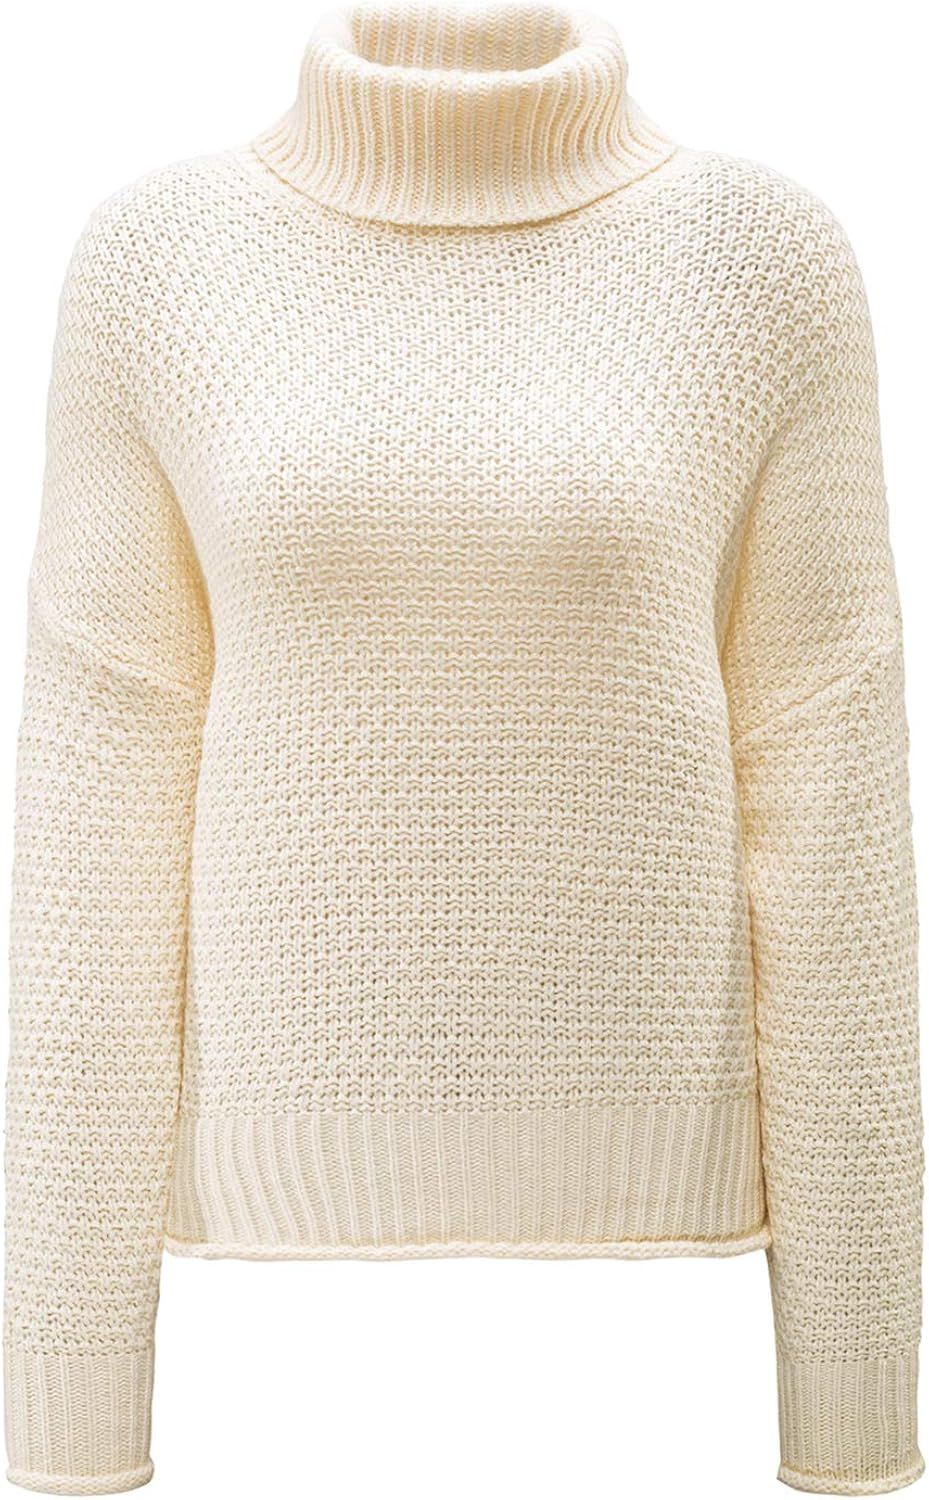 Chase Secret Womens Turtle Cowl Neck Solid Color Soft Comfy Cable Knit Pullover Sweaters S-2XL | Amazon (US)